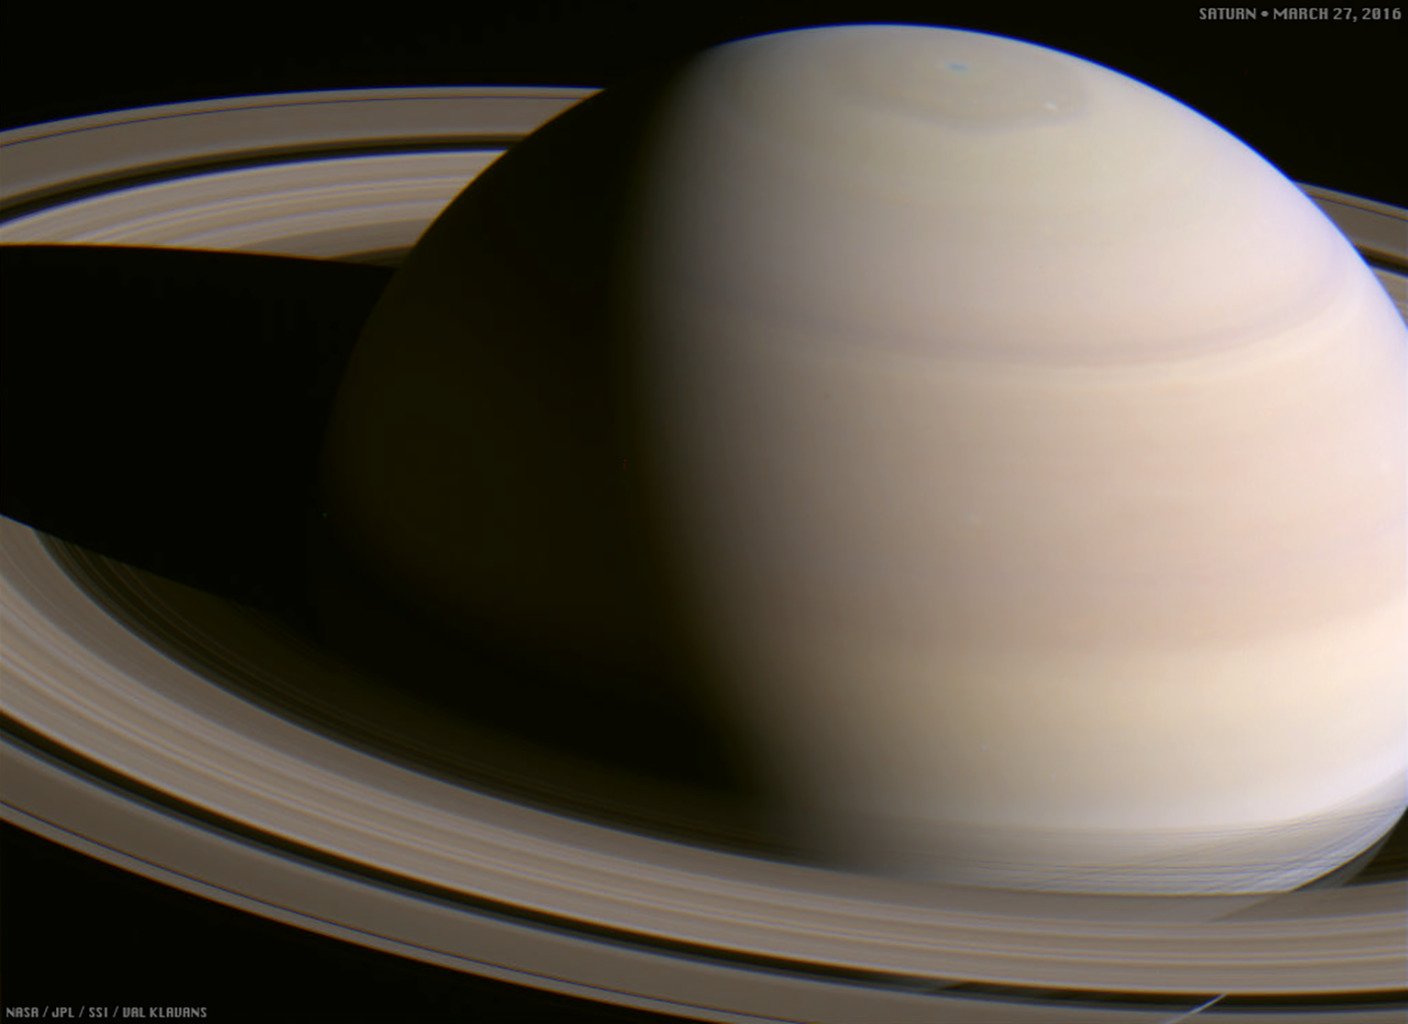 Cassini Solstice Mission, Saturn, Planet, Planetary rings, Solar System, Space Wallpaper